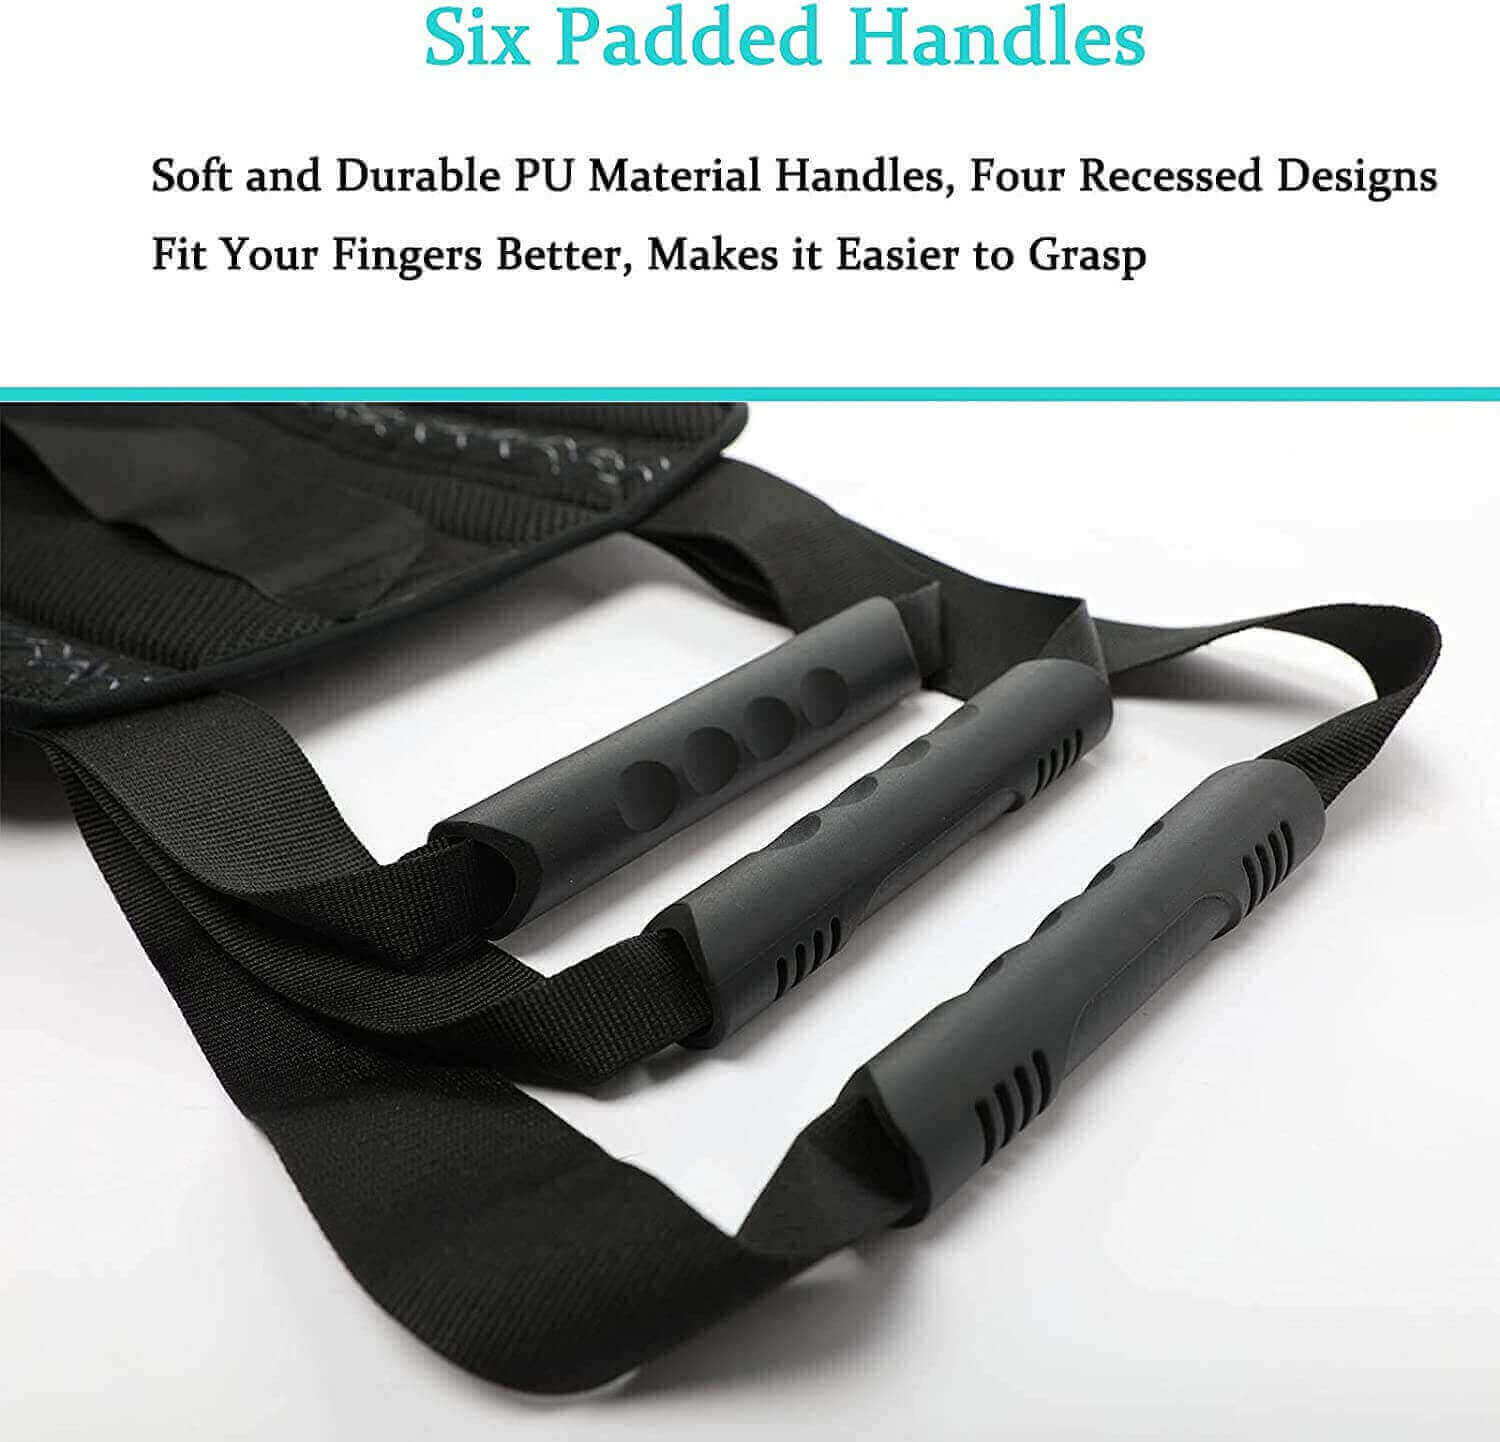 Fanwer 36-inch patient transfer sling with handles for disabled & elderly, padded handles